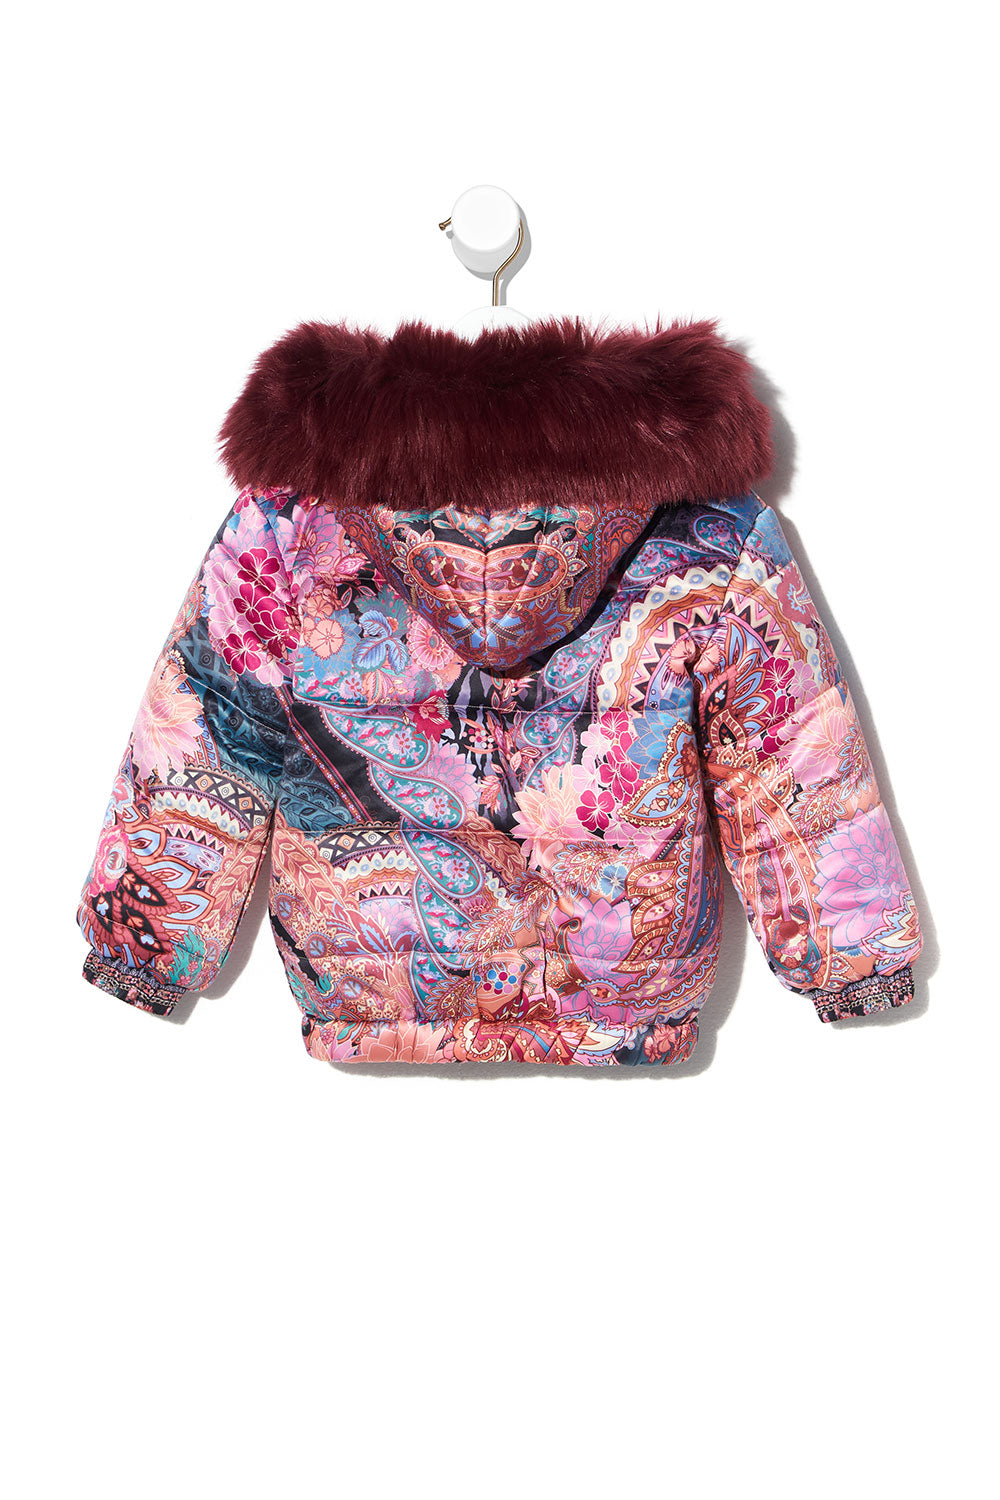 KIDS REVERSIBLE PUFFER WITH REMOVABLE FUR TRIM 4-10 MAYFAIR MARY